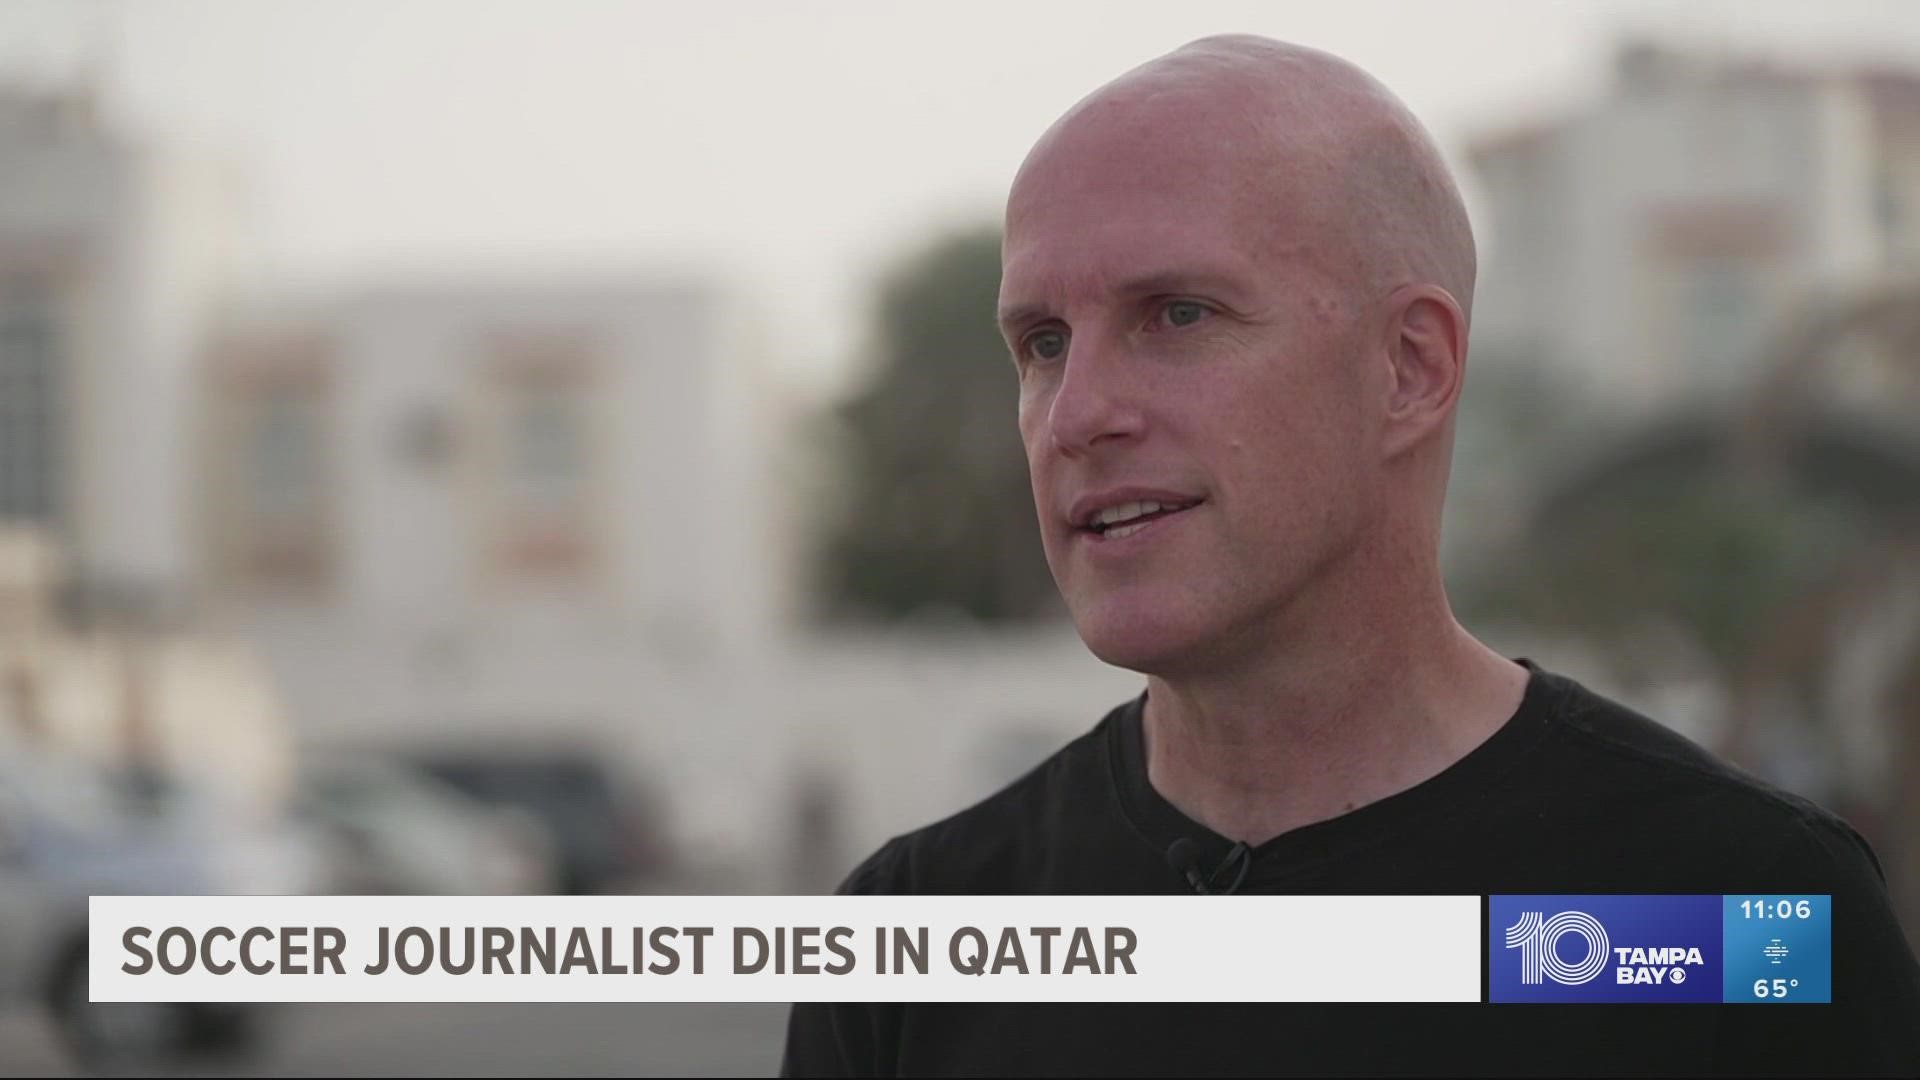 According to the Associated Press, well-known soccer writer Grant Wahl has died while covering the World Cup in Qatar